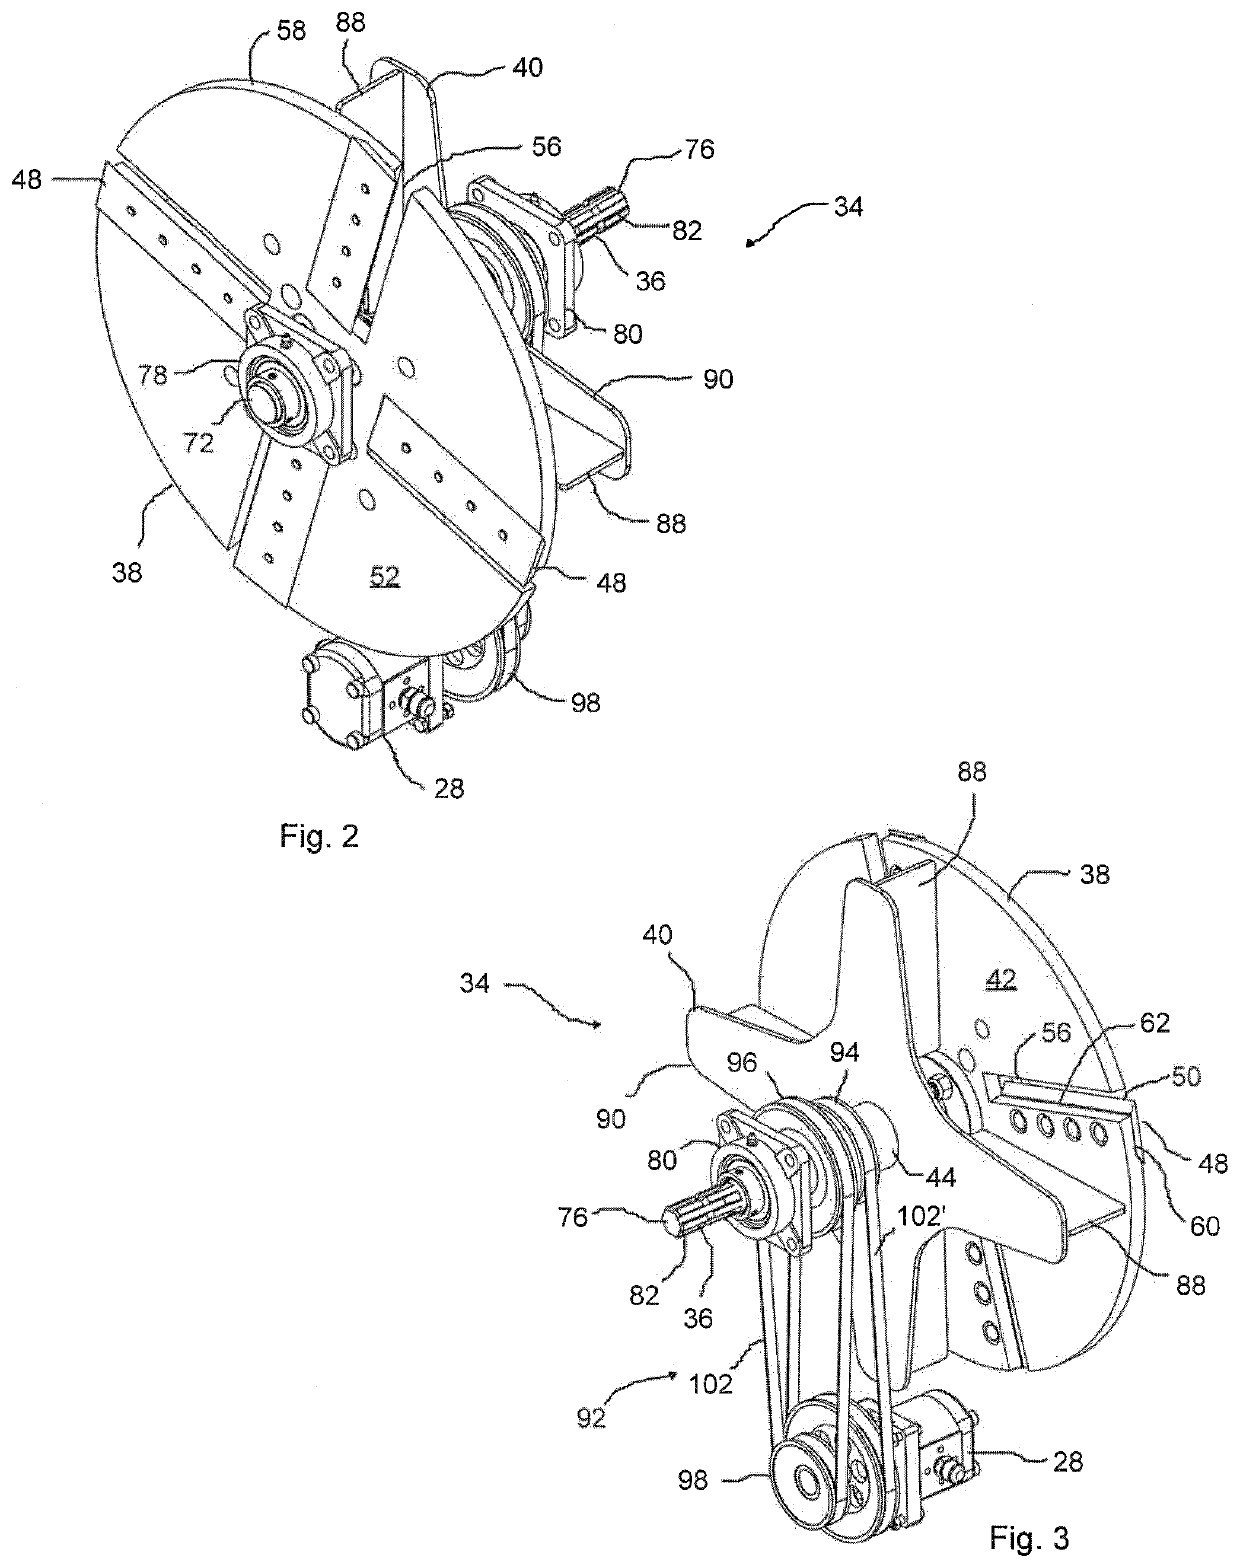 Flywheel and paddle assembly for a chipping or shredding apparatus, and an apparatus incorporating same